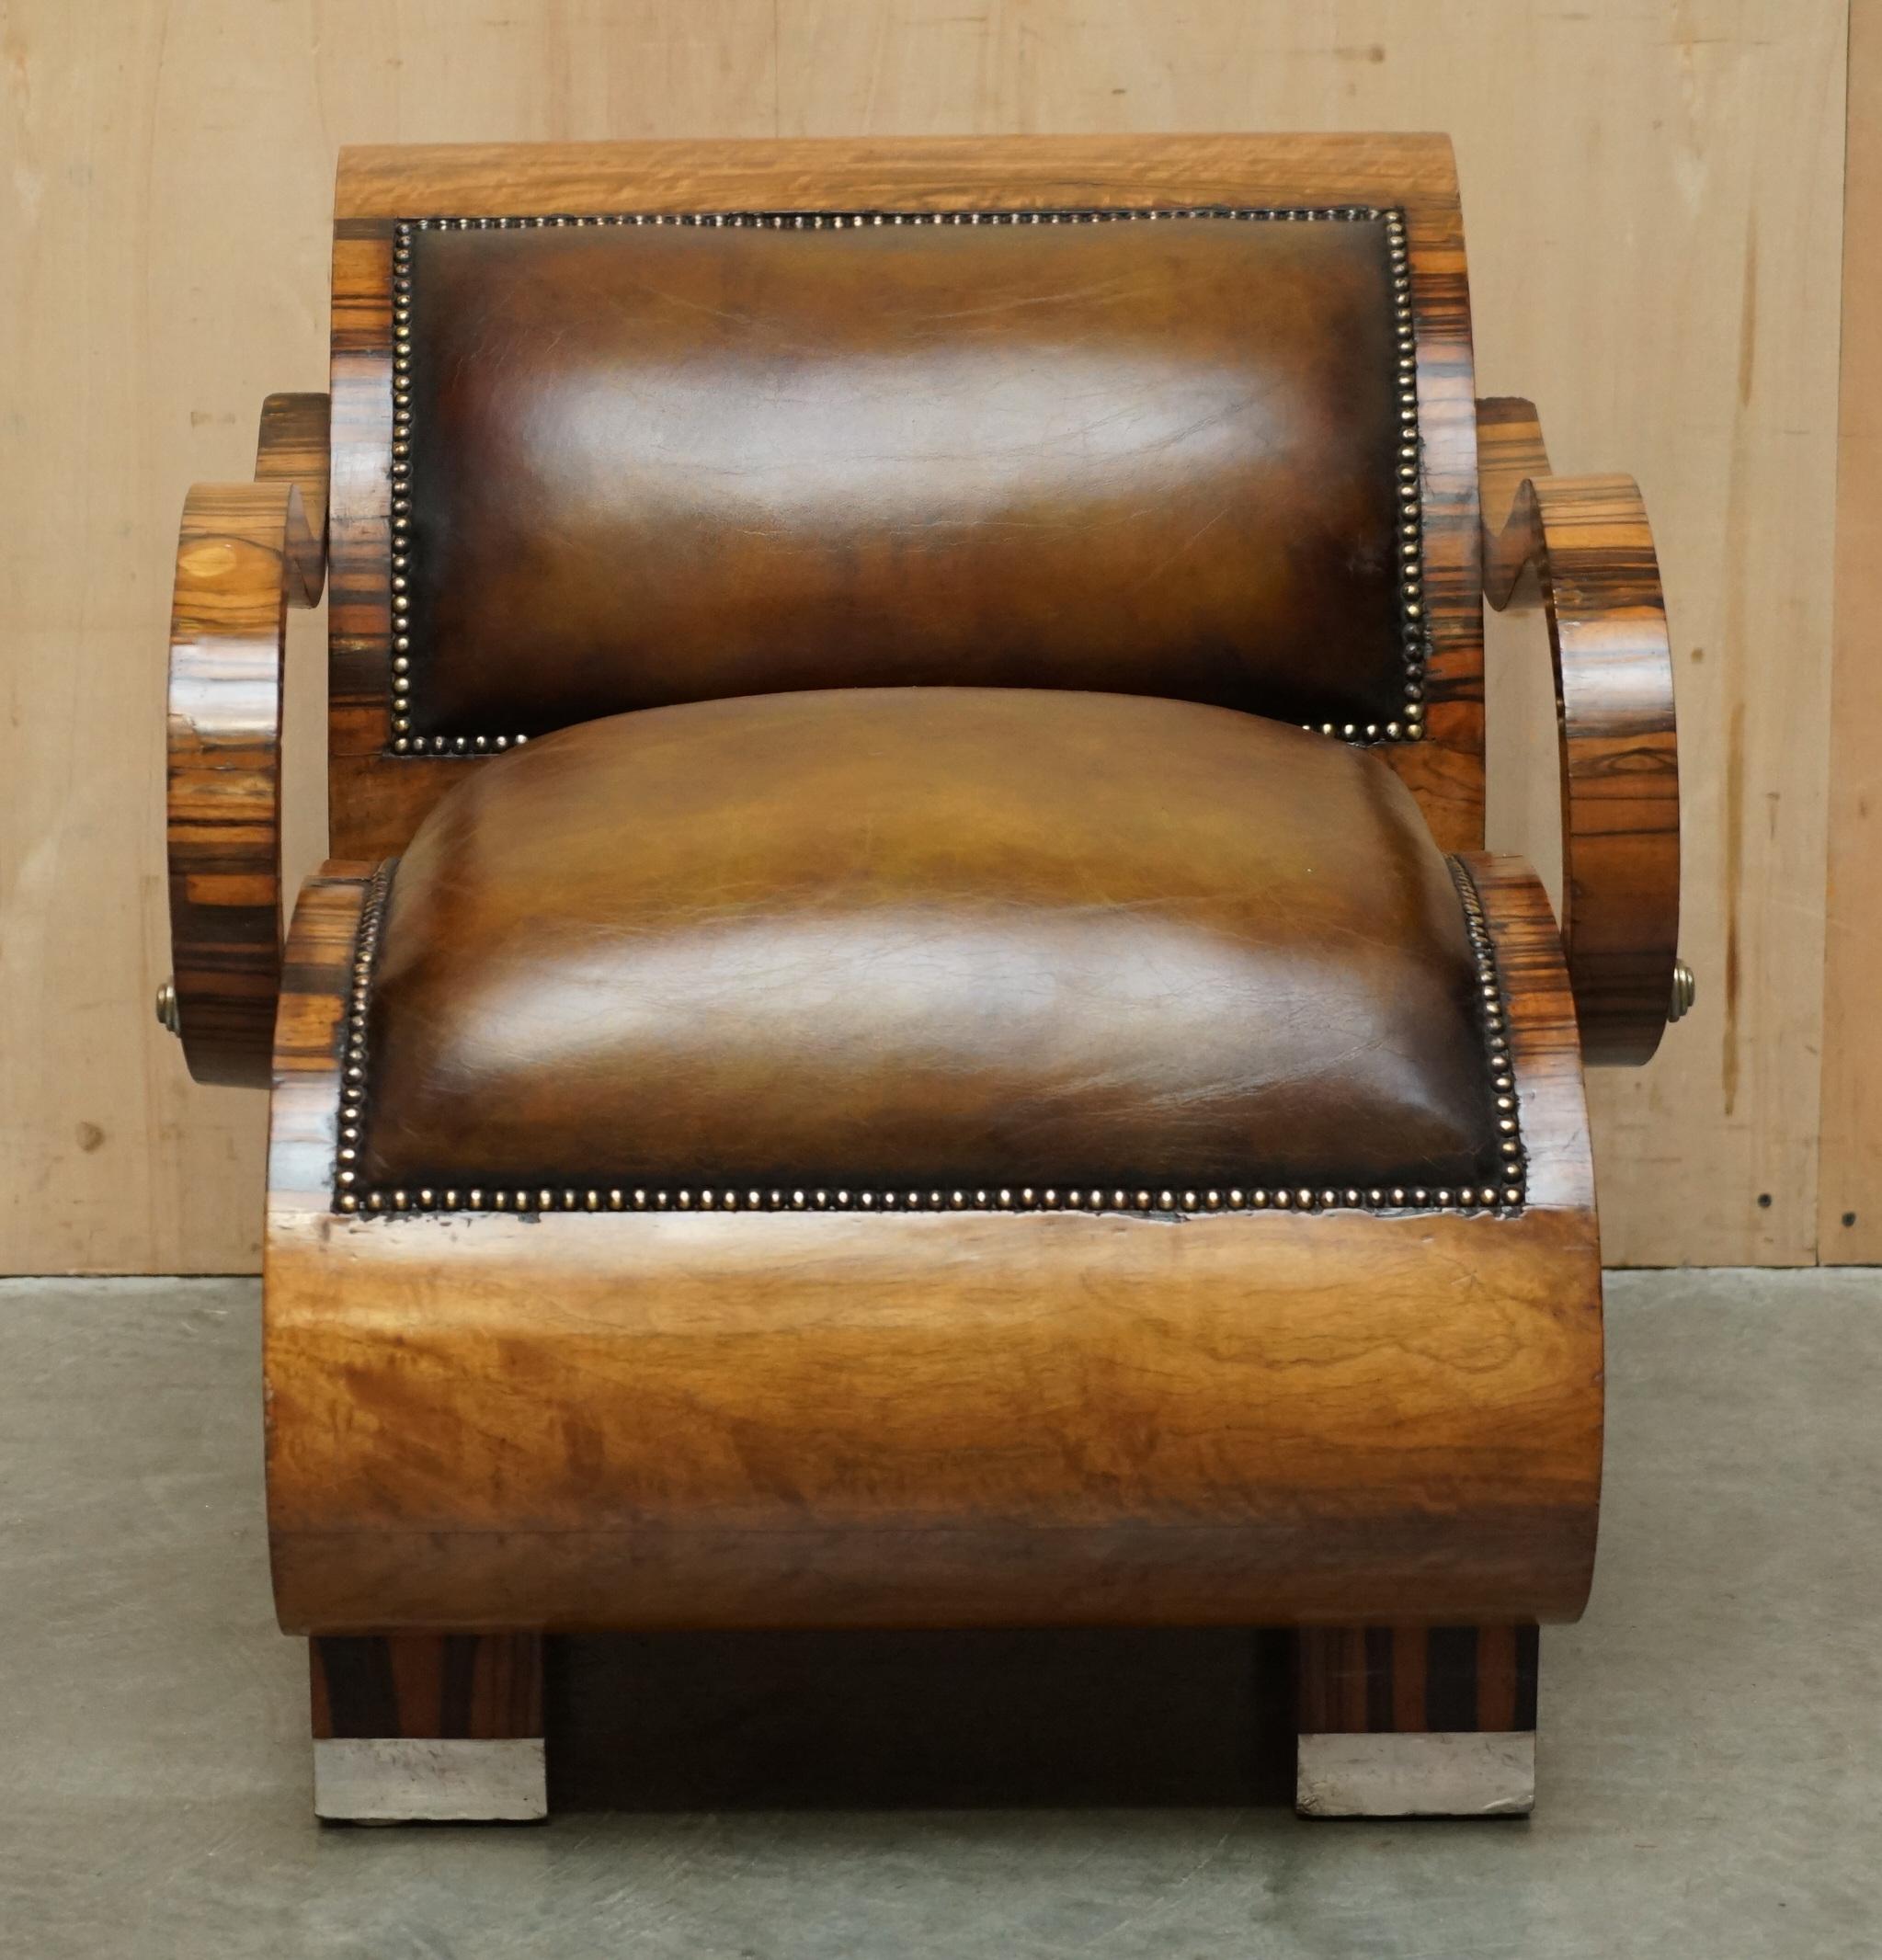 English FULLY RESTORED ART DECO CIRCA 1920's ZEBRANO BROWN LEATHER SOFA ARMCHAIR SUITE For Sale